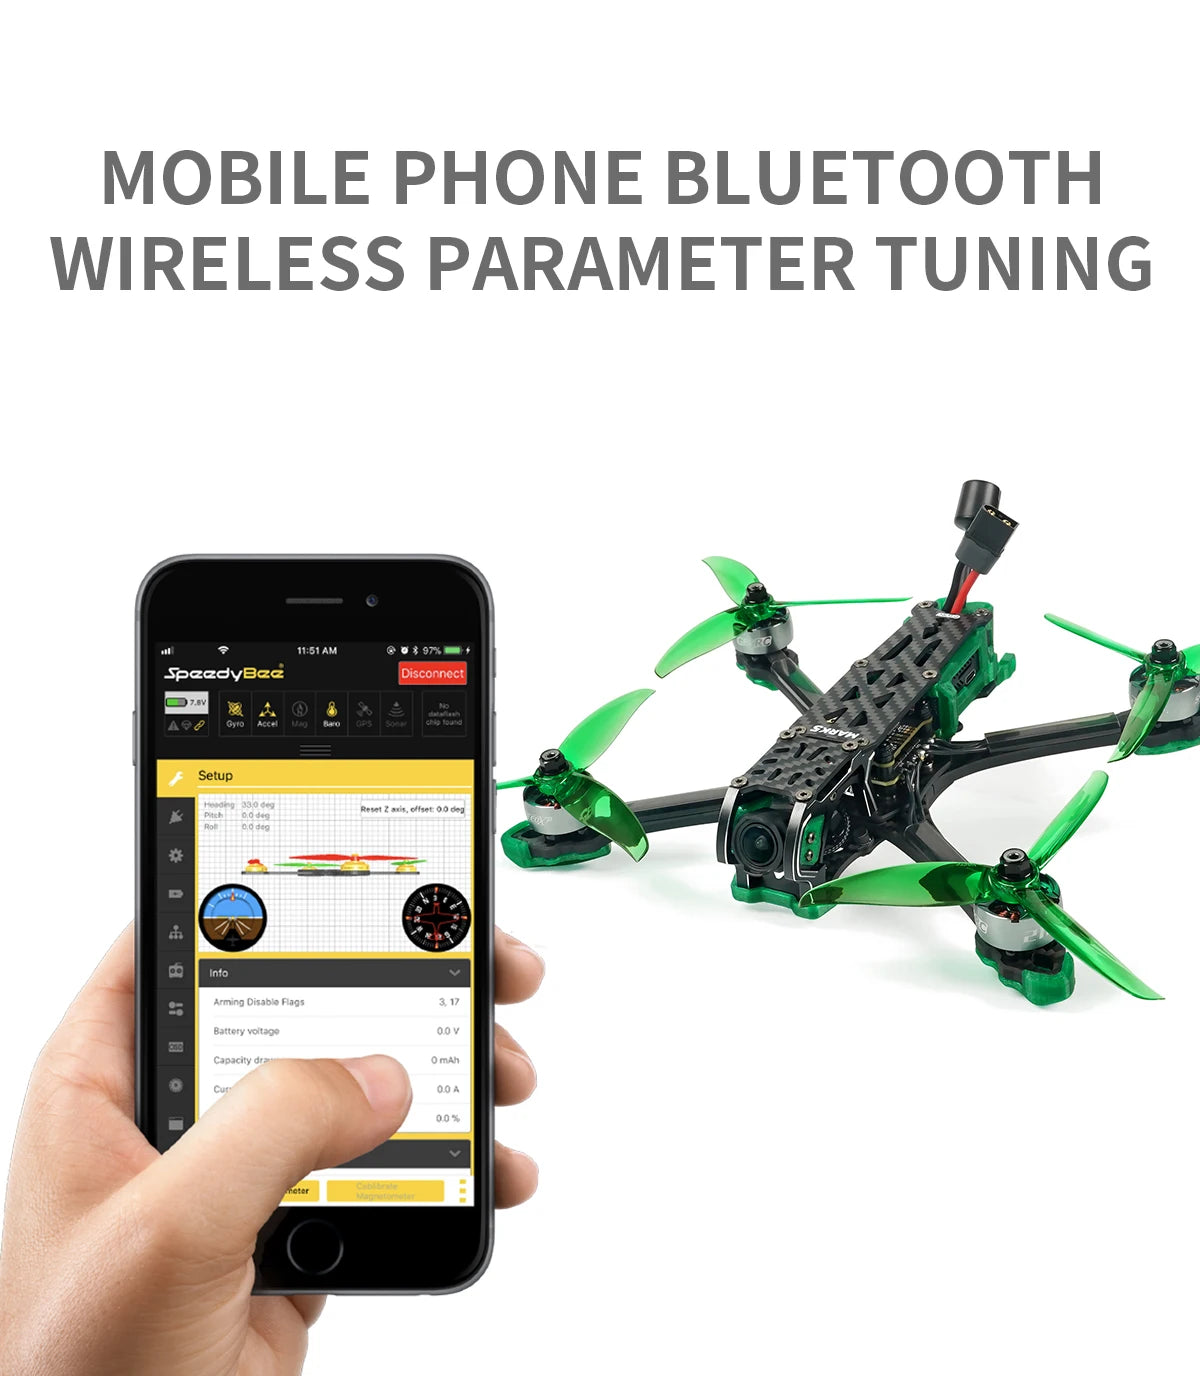 GEPRC MARK5 C HD O3 Freestyle FPV, MOBILE PHONE BLUETOOTH WIRELESS PARAMETER T